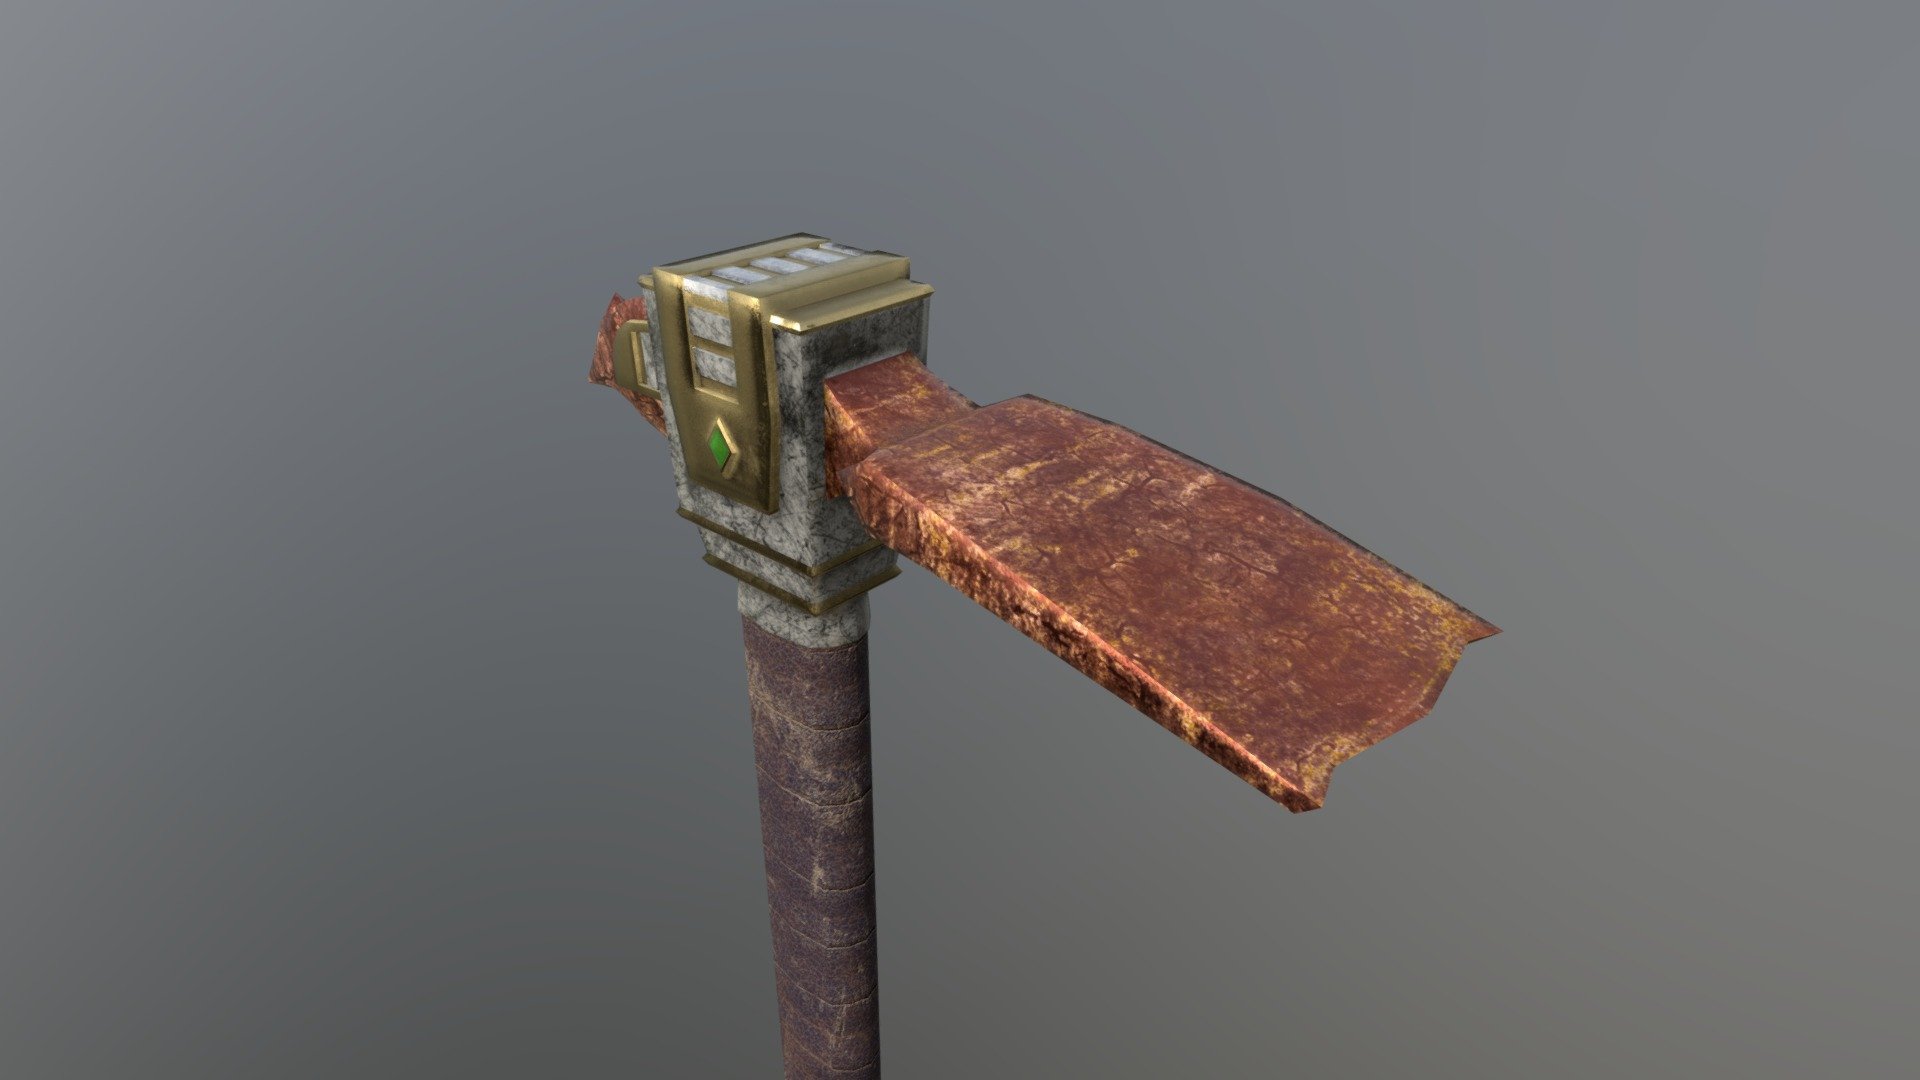 Enhance your best survival/crafting projects (game, render, advertising, design visualization, VR/AR&hellip;) with this awesome Orichalcum Hoe !

Game-ready !

Low-poly but very high quality material for the best visual and performance. Ideal for VR/AR games !

PBR material ready-to-go optimized for multiple engines and rendering software (Unity, Unreal Engine, Crysoftware, Blender&hellip;)

Technical Details

-&gt; 1 High-detail mesh but very optimized in poly-count :




556 Vertices | 462 Faces | 855 Tris

Clean mesh, only planar quads and tris

Smoothing group, pivot point and Position/Rotation/Scale already set

Real-size object

-&gt; 1 PBR Material

-&gt; 4 Textures in 2k resolution :




Albedo/Diffuse/Color map

Metalic/Roughness map

Normal map

Ambient Occlusion map

-&gt; UV Map clean and no-overlapping.

-&gt; Modelized in Blender and textured in Substance Painter.

-&gt; Multiple file available : .blend, .fbx, .obj, .unitypackage.

For any more informations, don't hesitate to contact me ! - Hoe Orichalcum - Buy Royalty Free 3D model by Arigasoft 3d model